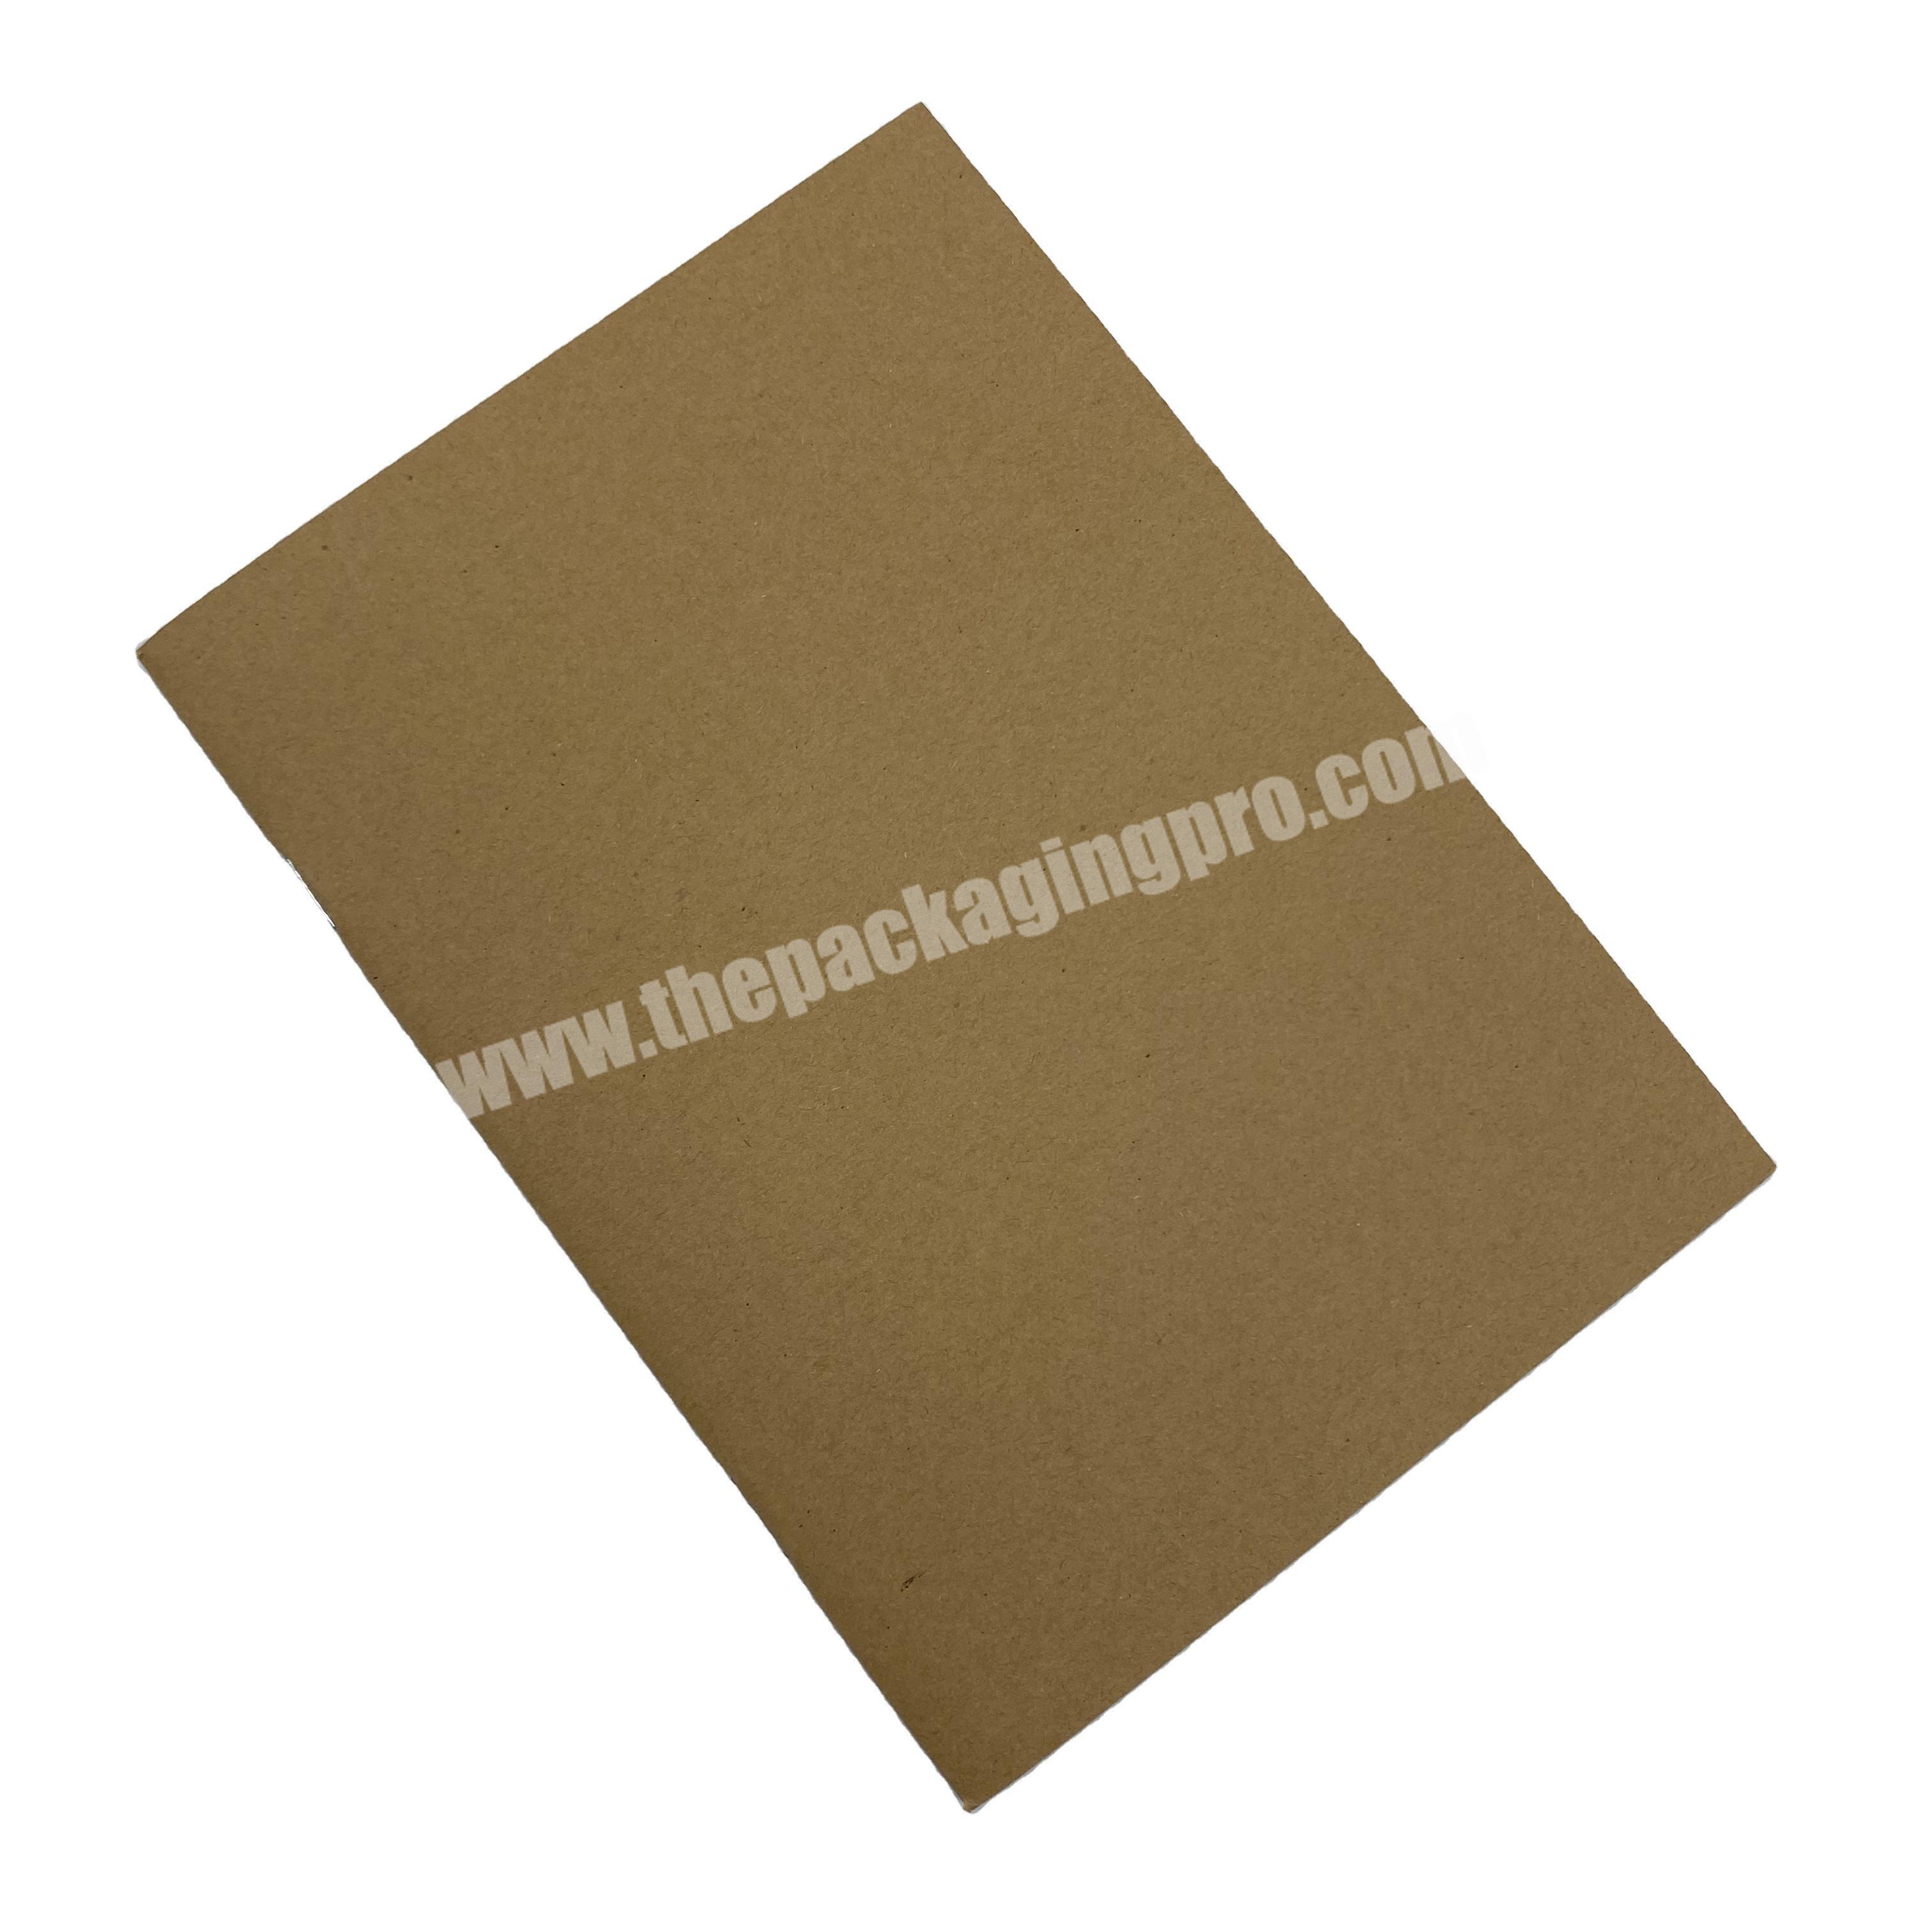 custom size silicone release paper reusable blank sticker book collecting  albums with brown kraft covers sticker